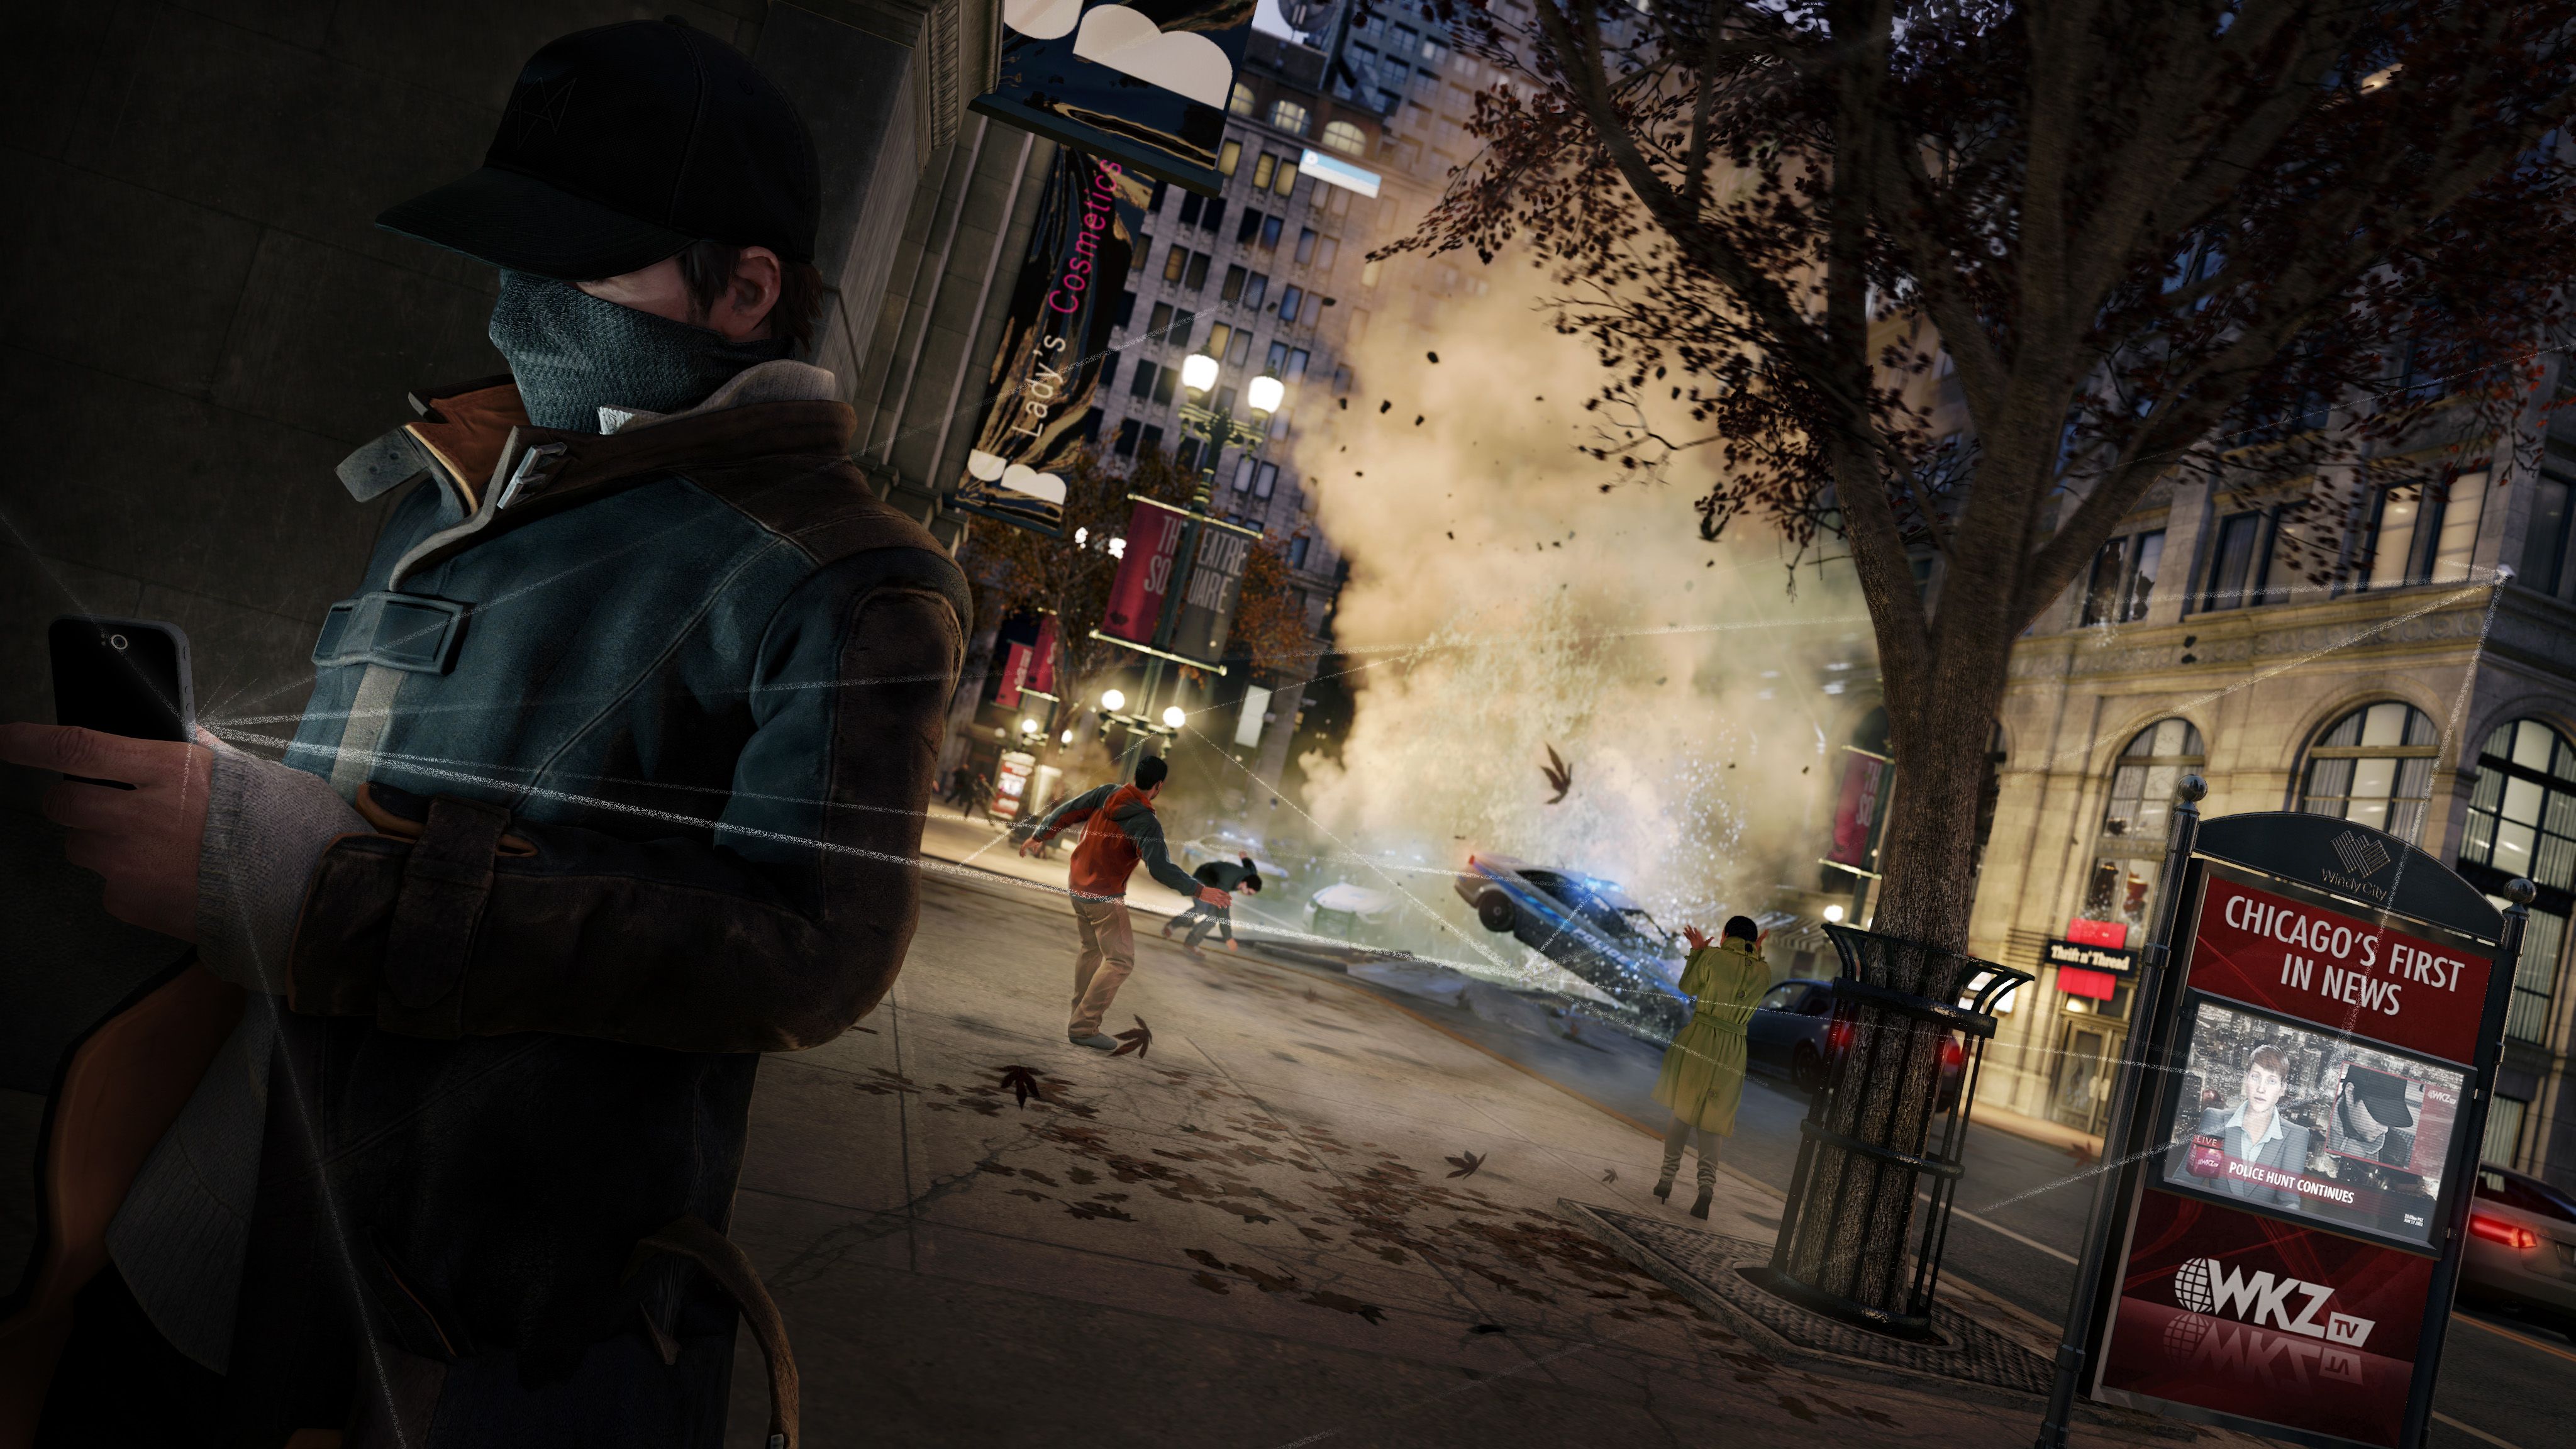 interview watch dogs creative director talks next gen the future of gaming apps and more image 12